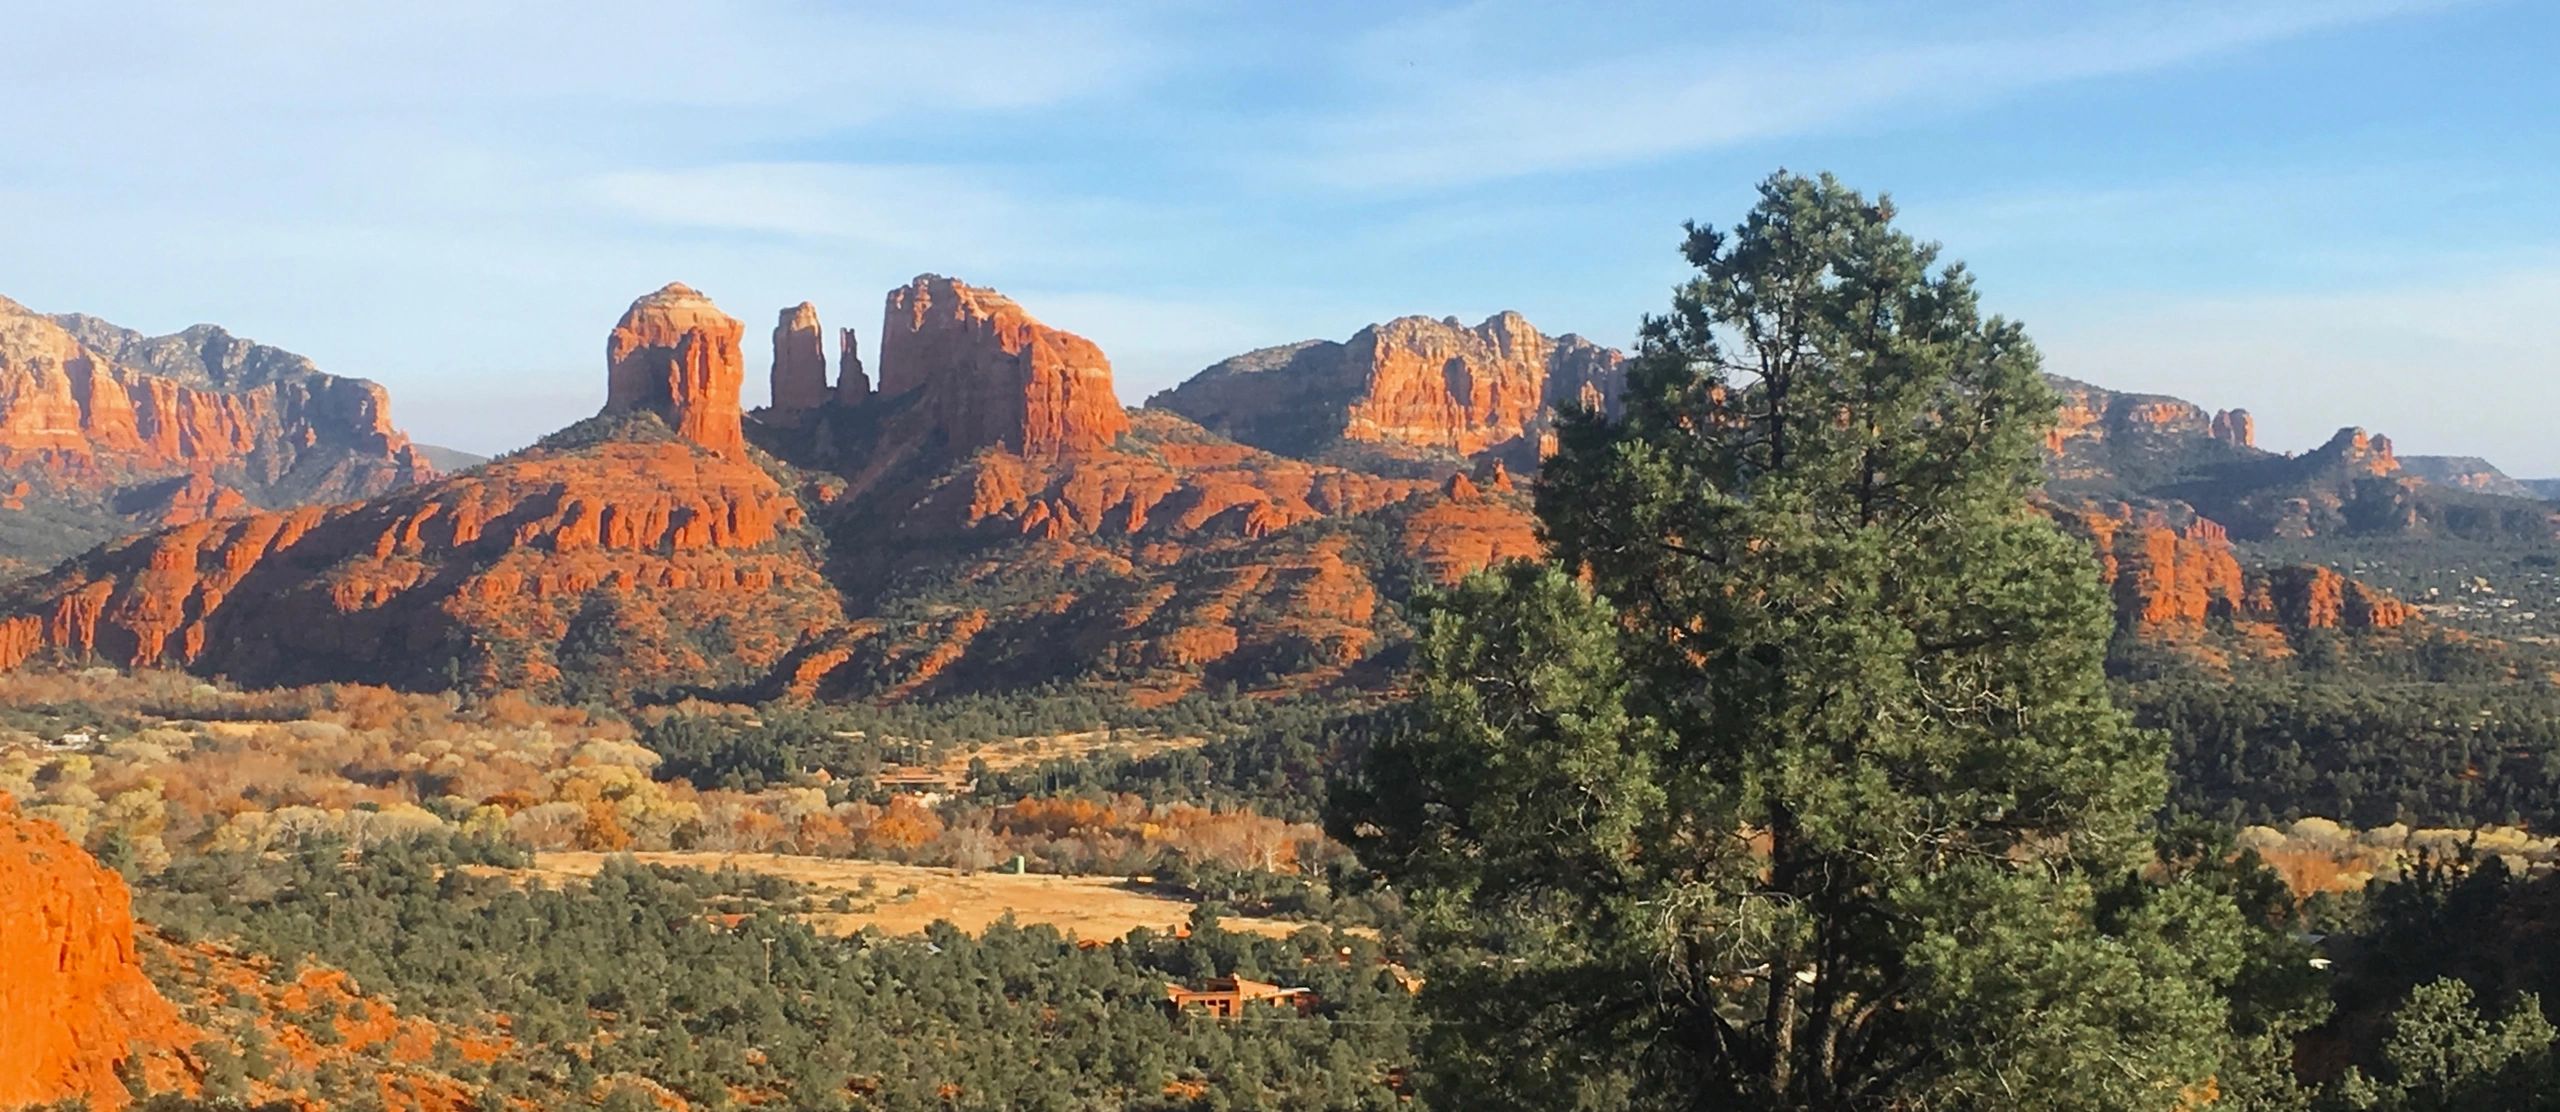 Cathedral Rock in Sedona, Arizona, is one of the Beautiful Natural Landscapes near our home.